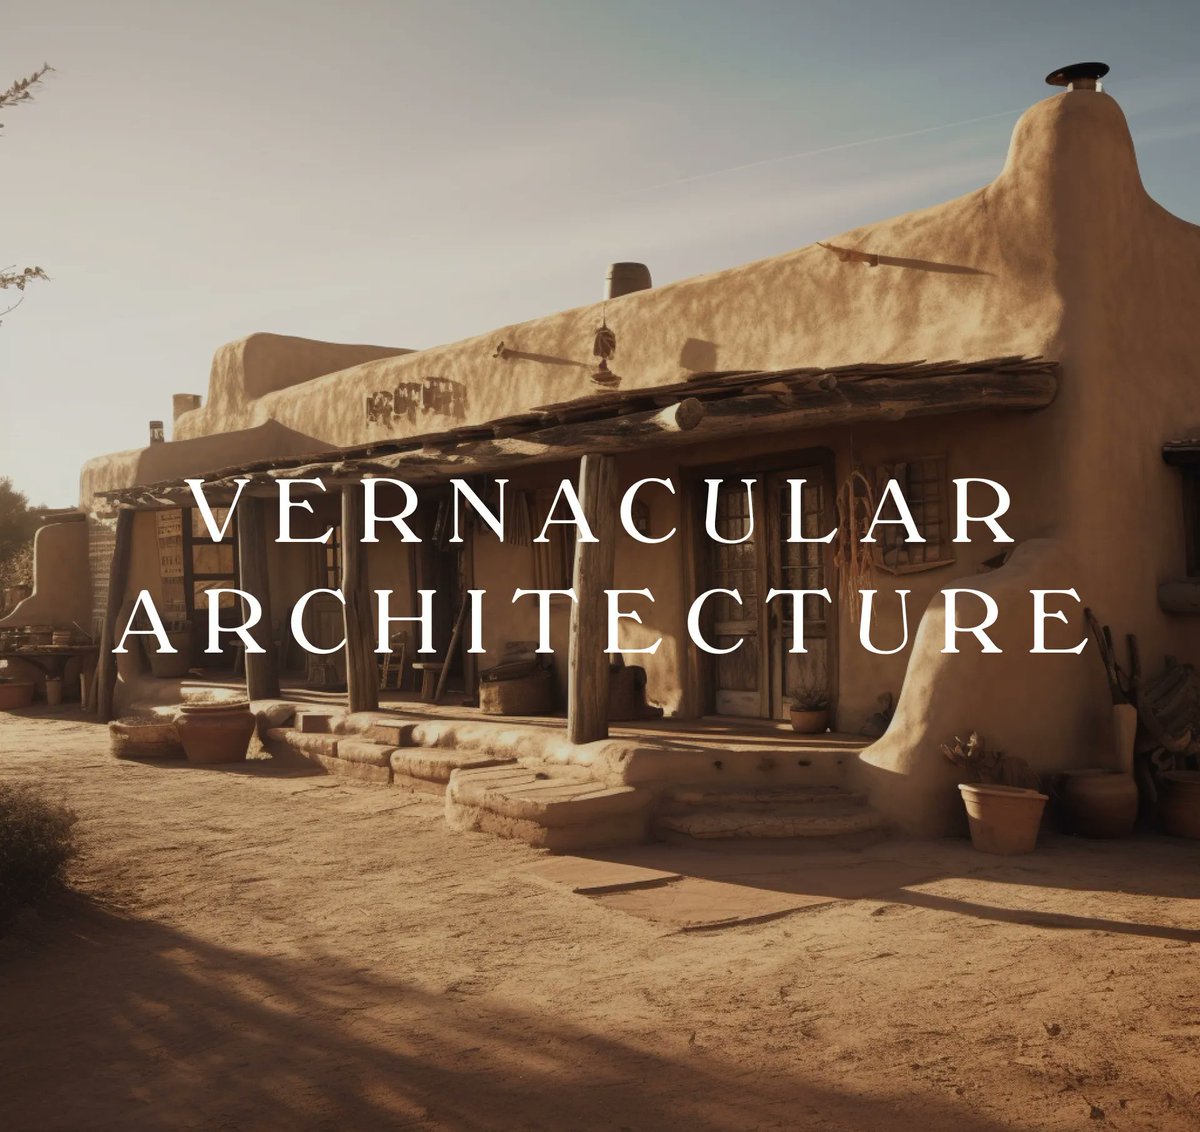 A tribute to local wisdom and materials, #VernacularArchitecture mirrors the climate, culture, and spirit of its place, grounding us in our roots.